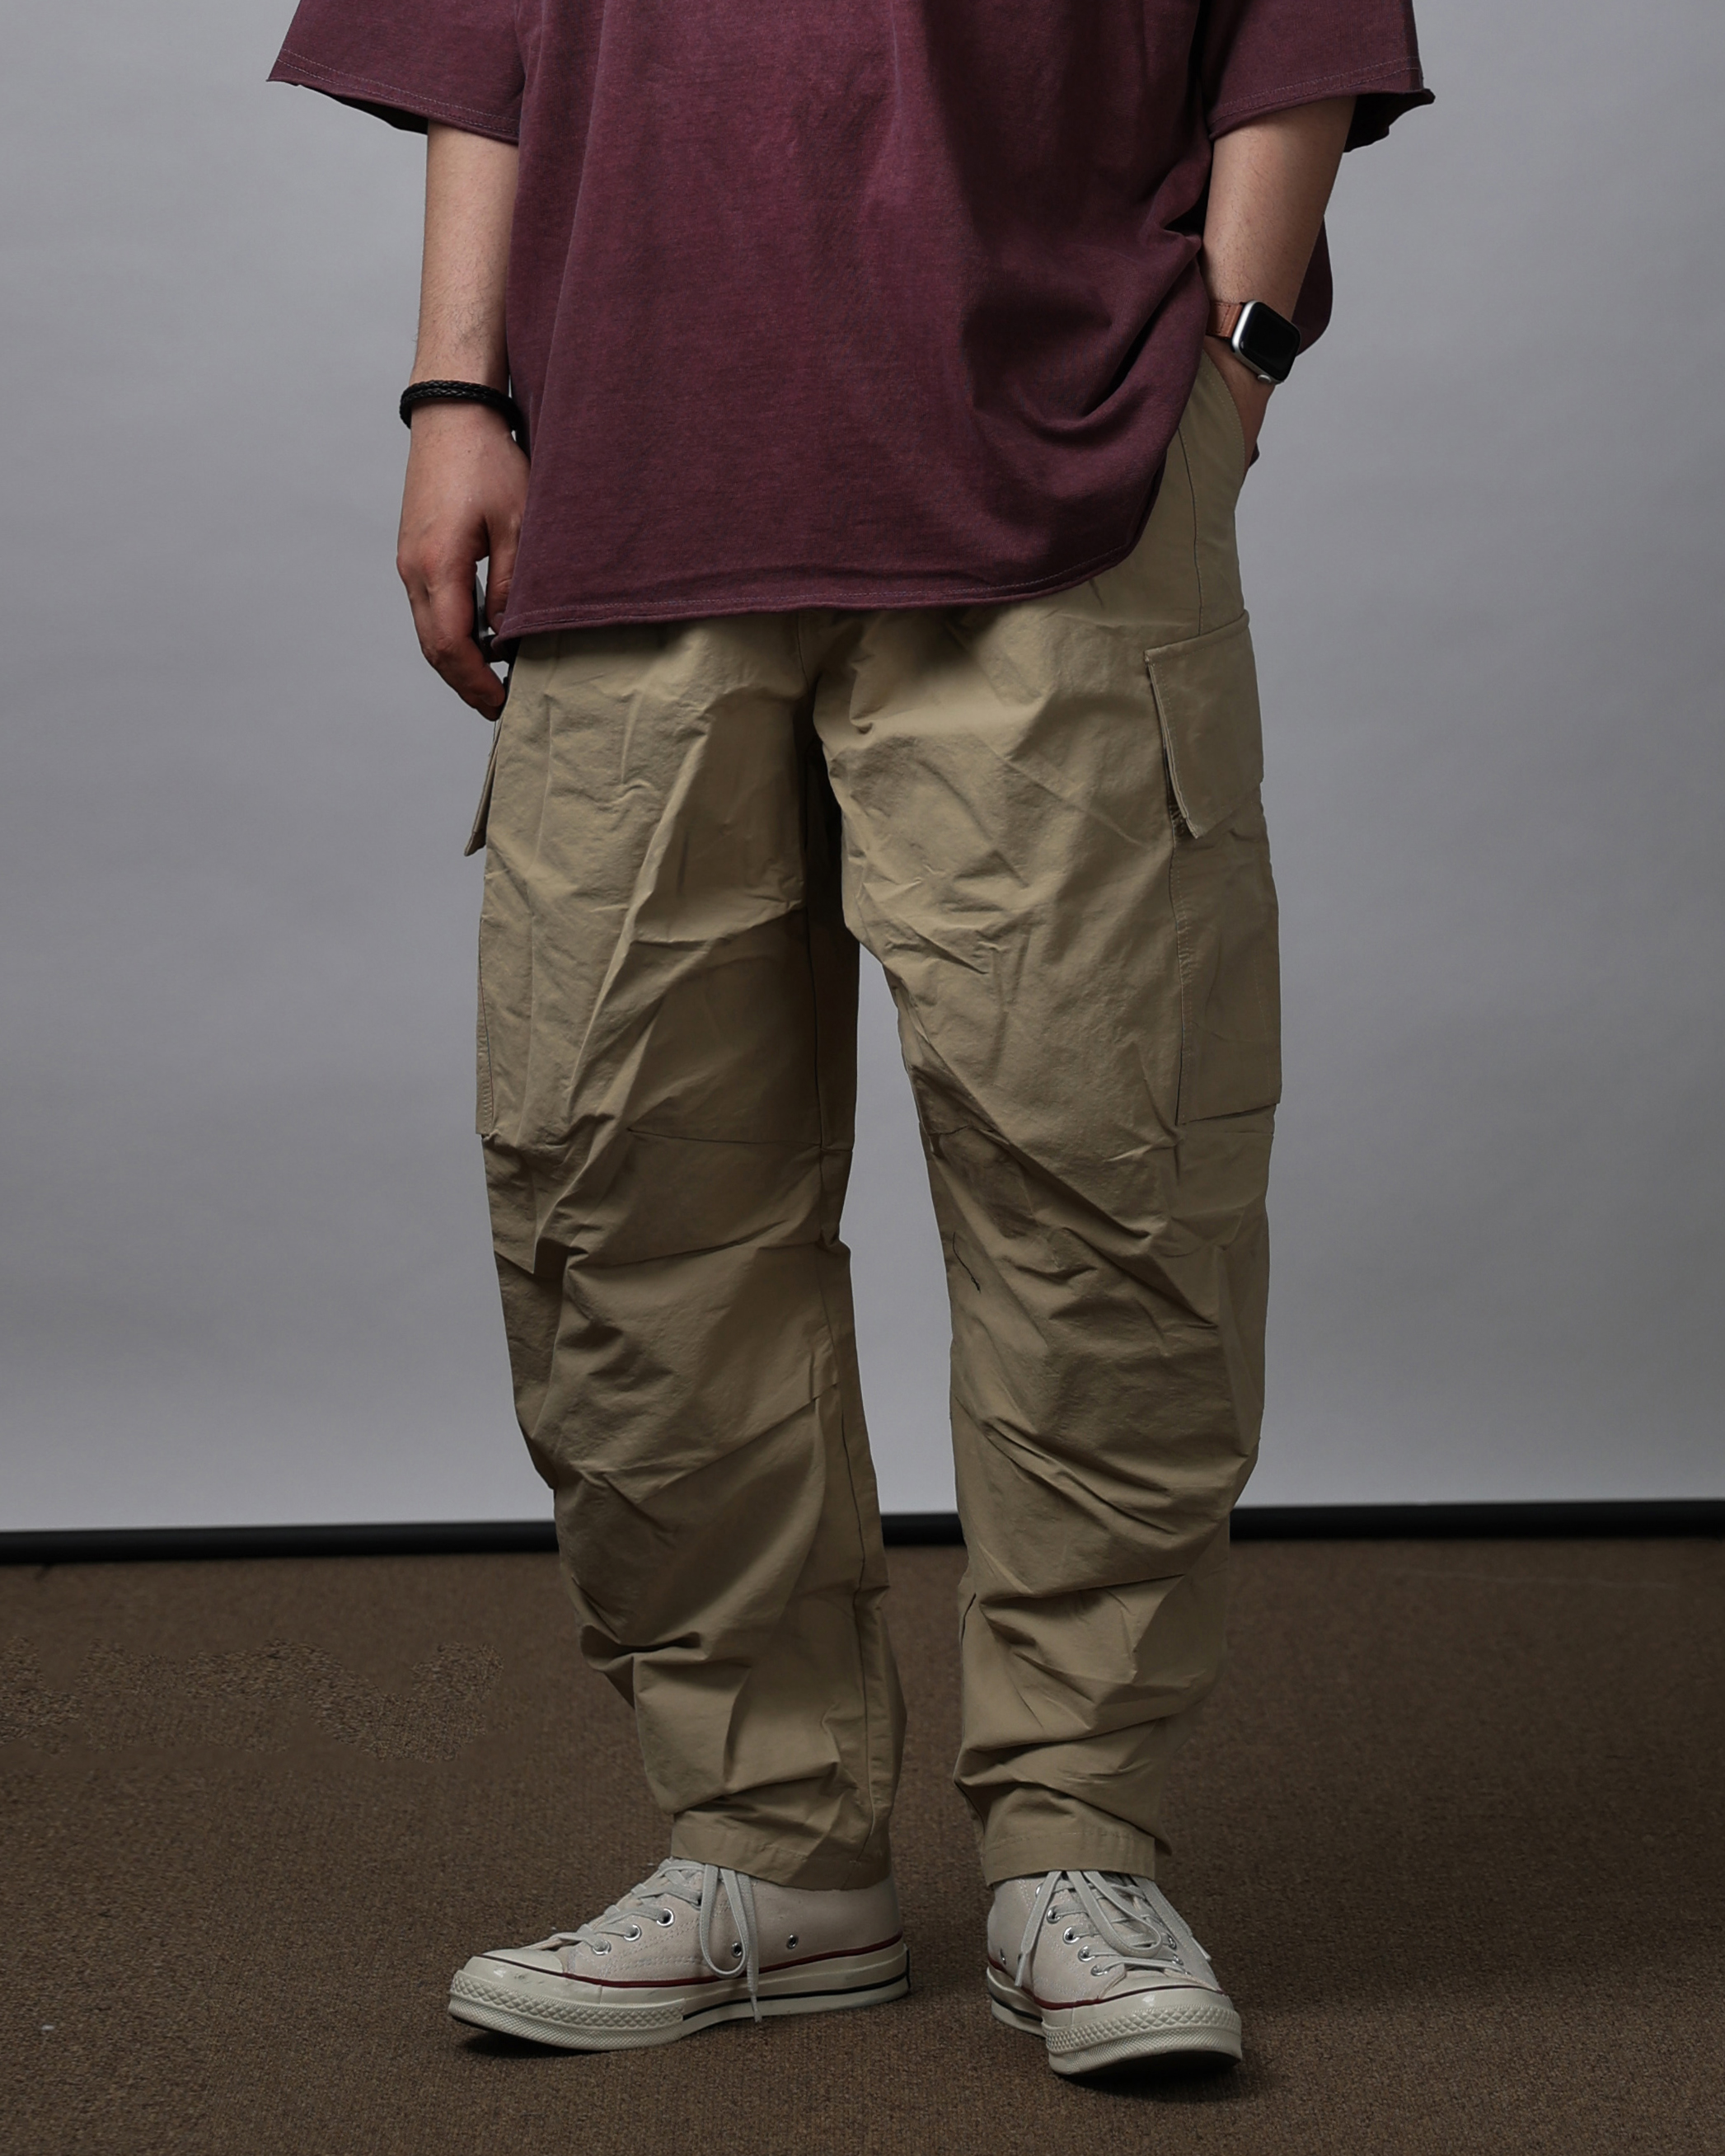 EXPRESS One Tuck Cargo Carrot Pants (Black/Olive/Beige)